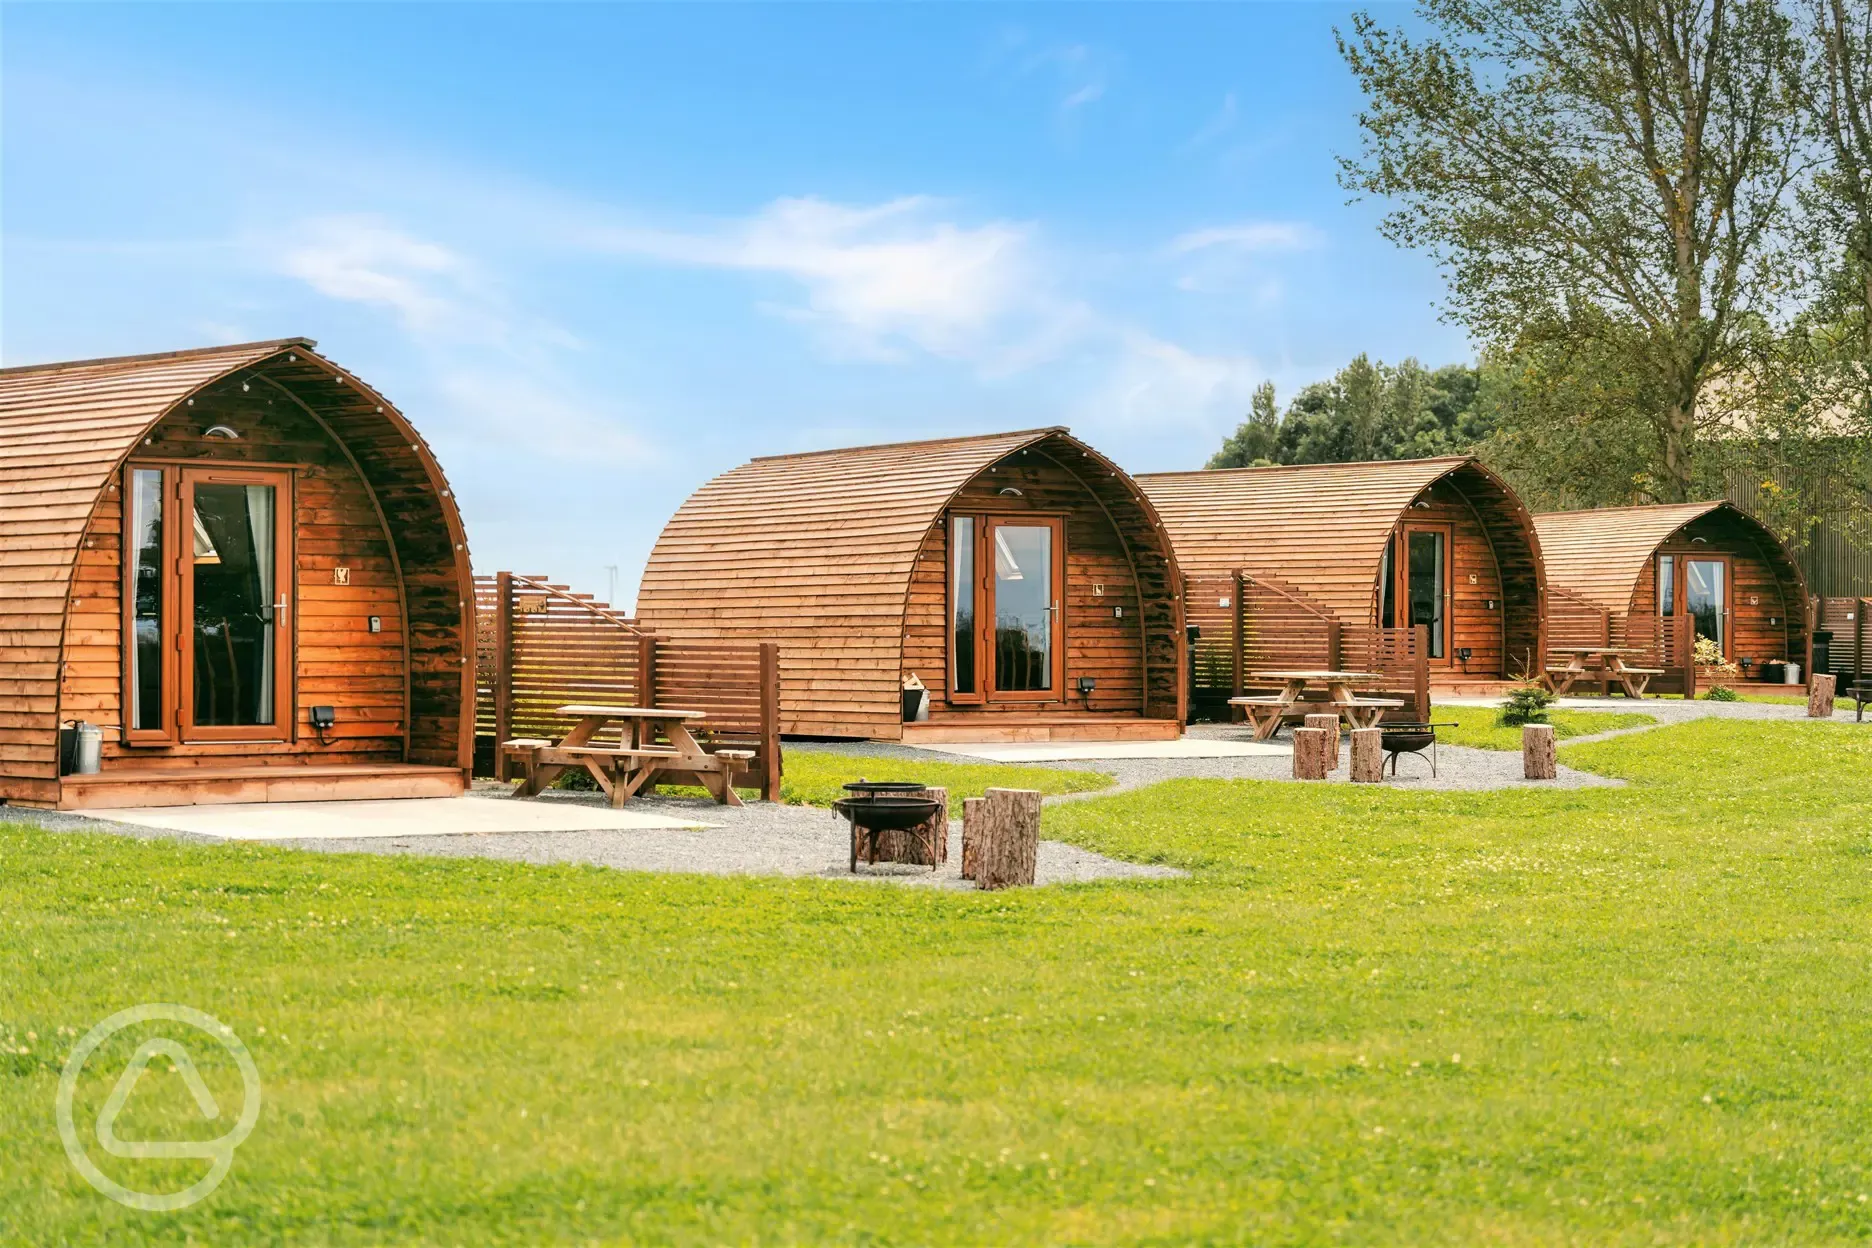 Glamping pods with hot tubs